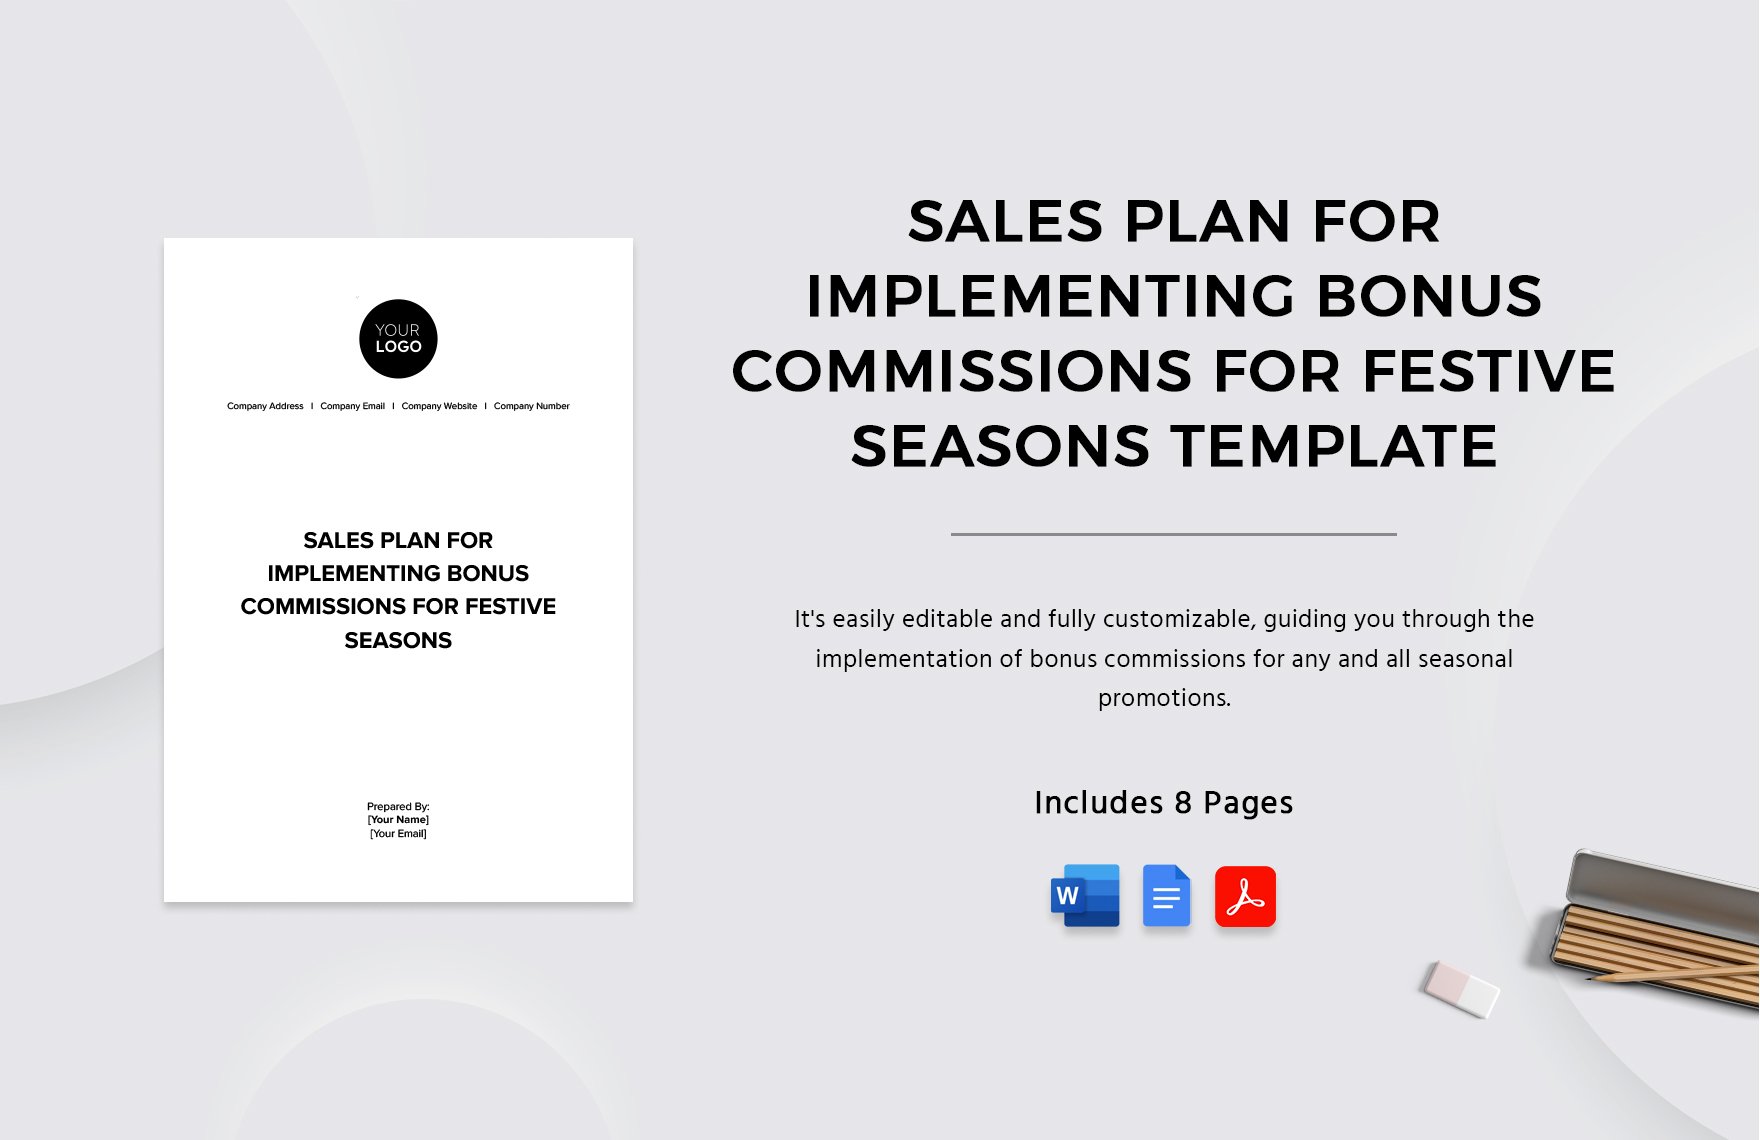 Sales Plan for Implementing Bonus Commissions for Festive Seasons Template